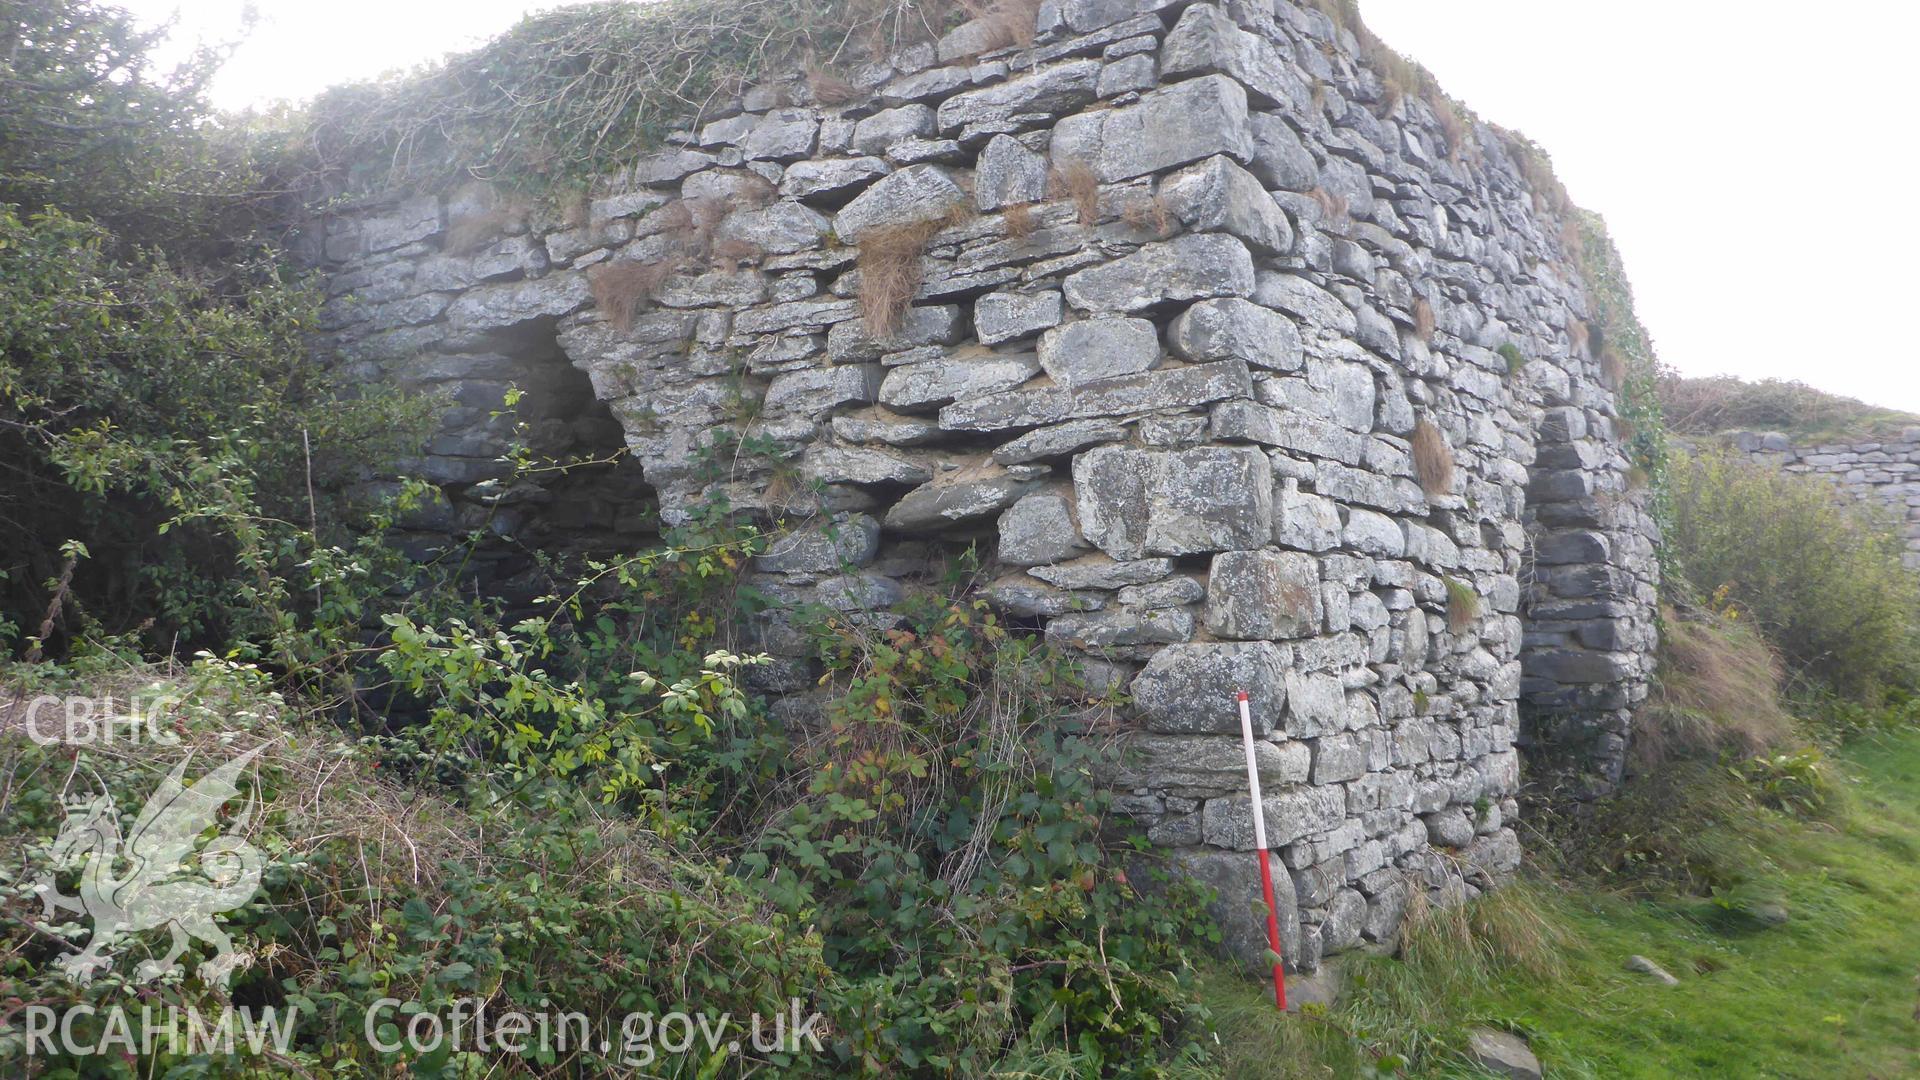 Digital colour photograph showing Craiglas Lime Kilns - lime Kiln 2, north-west (right) and north-east elevations and kiln-eyes.